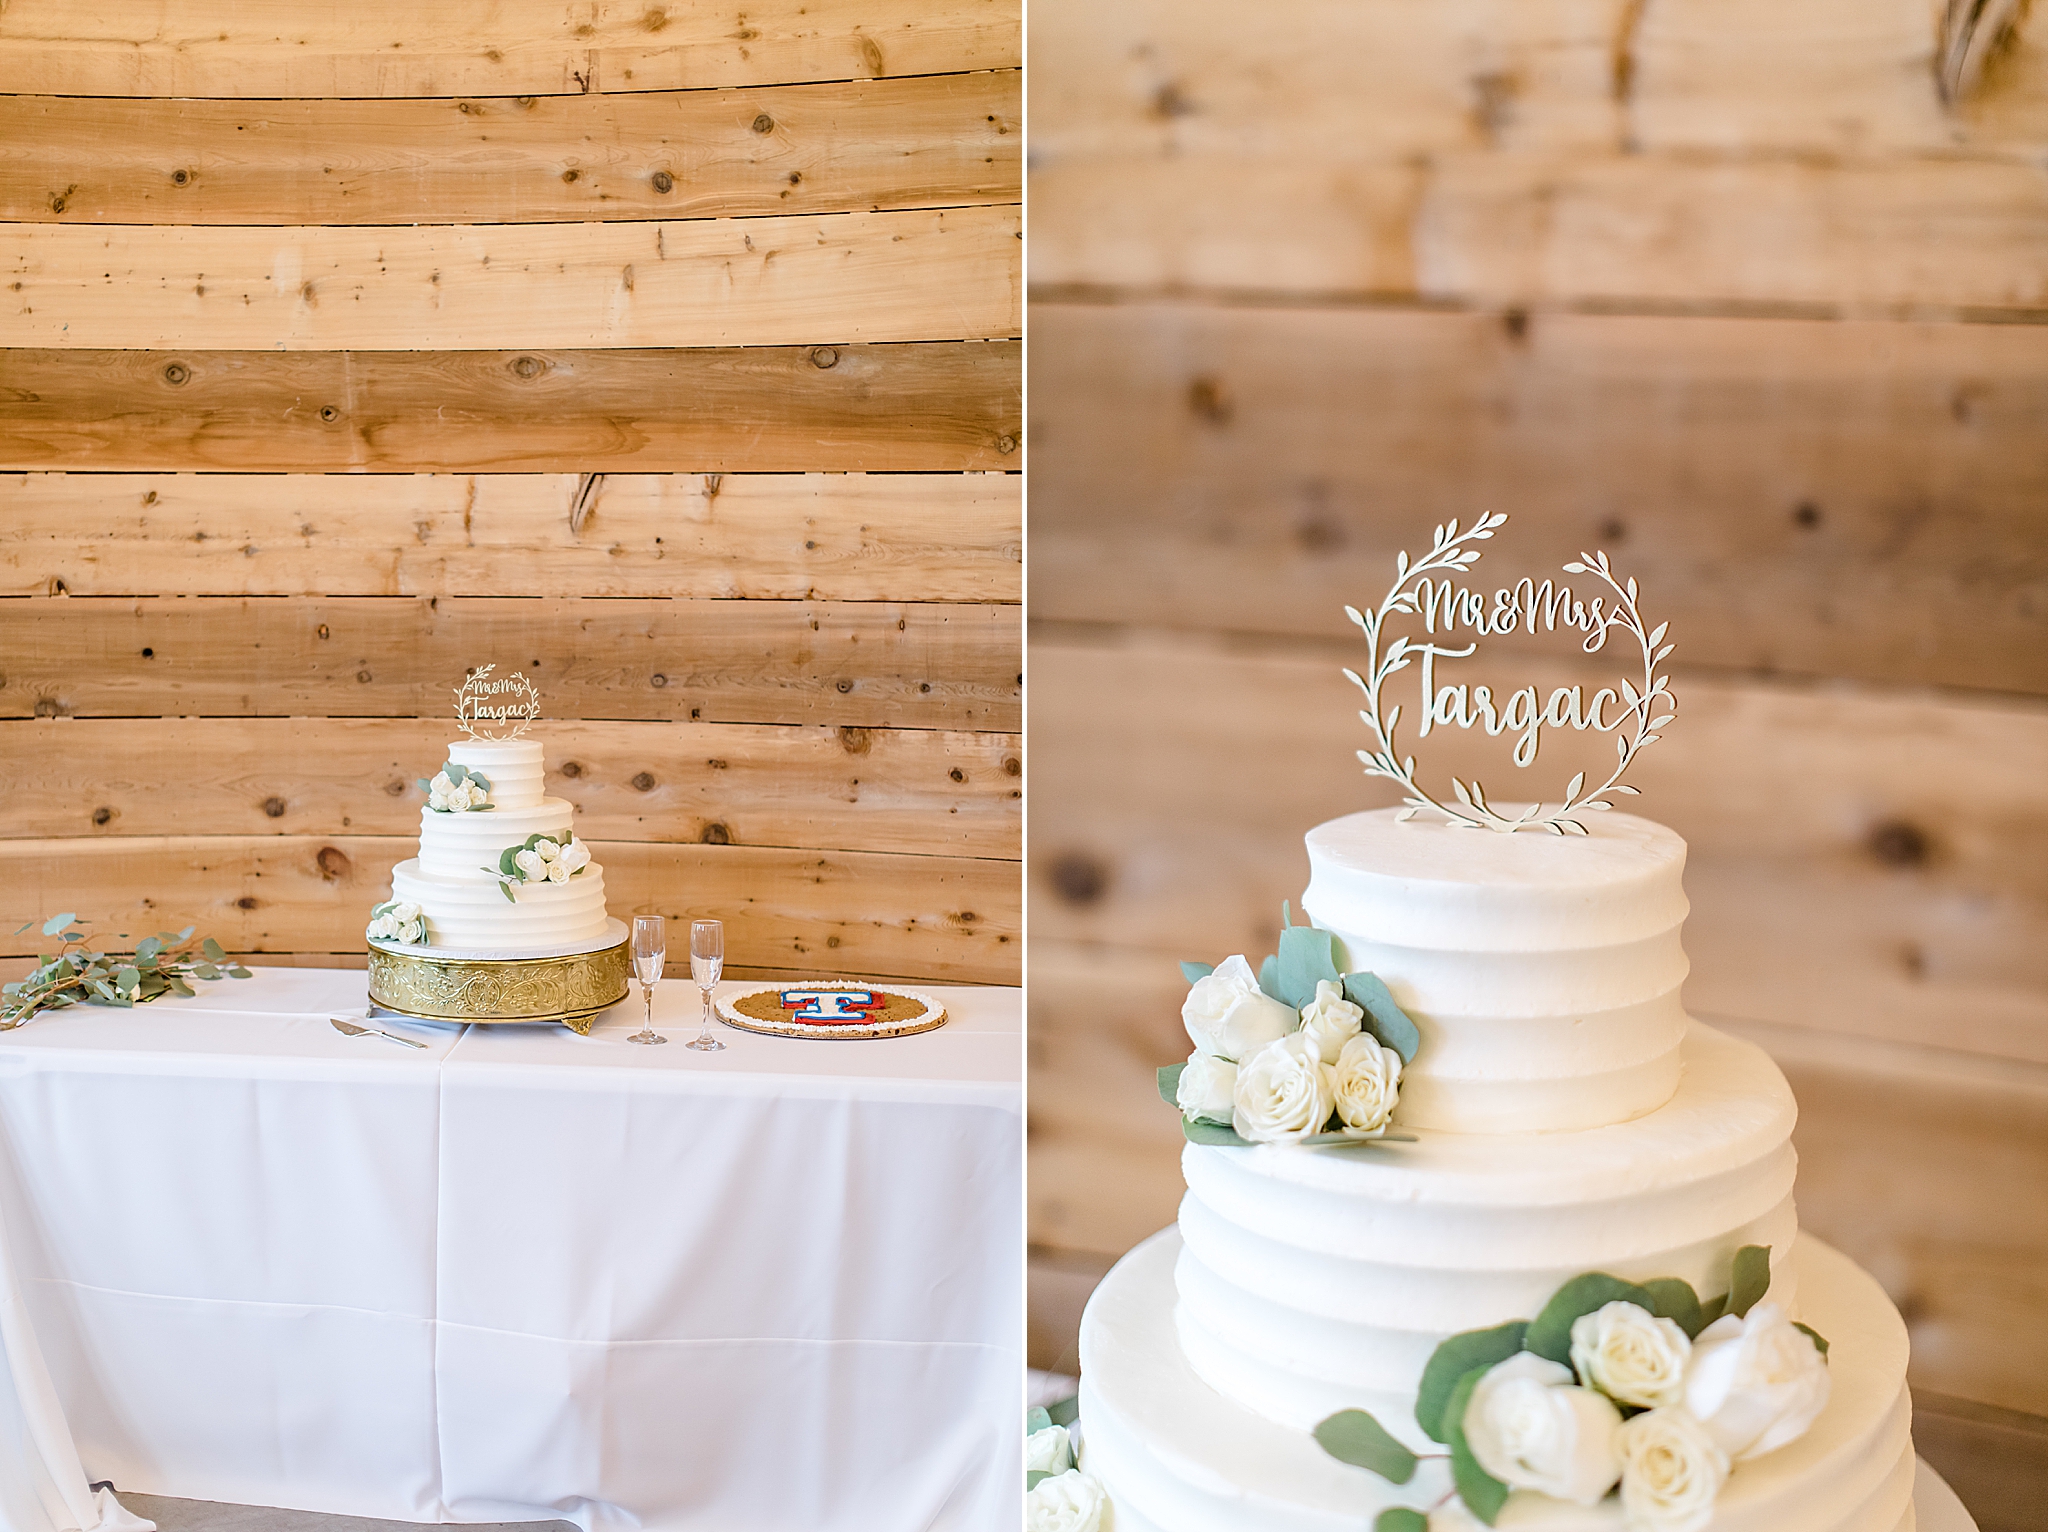 cake with white floral details and custom topper